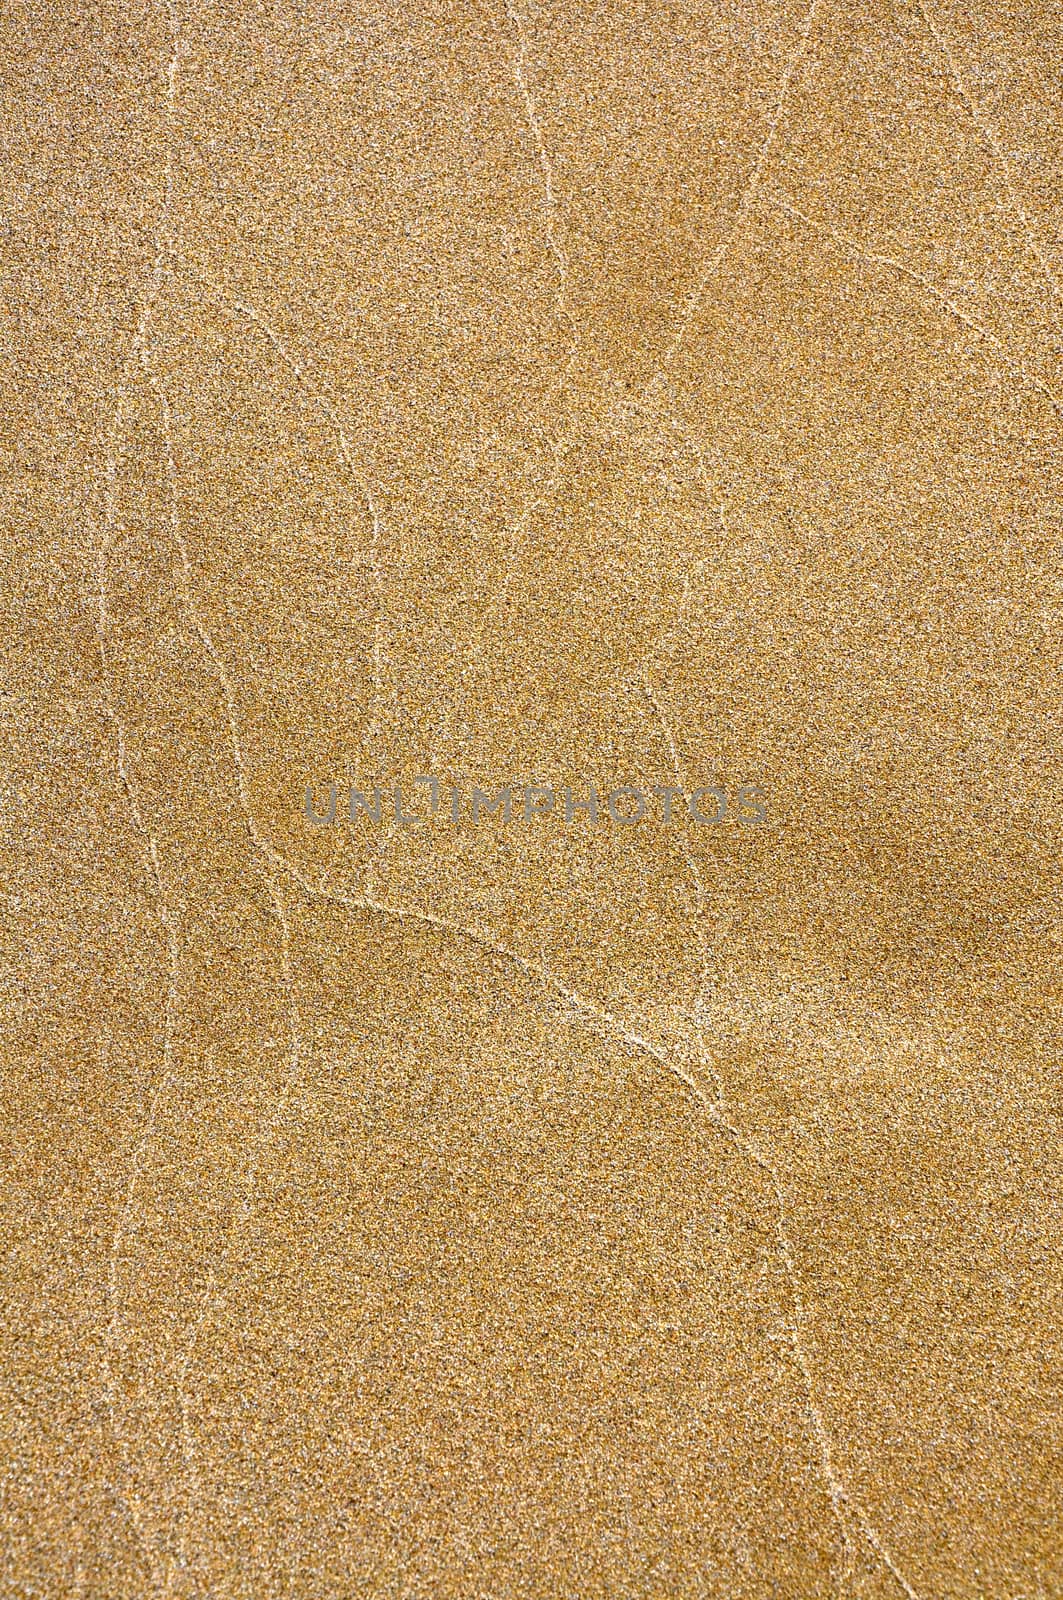 Sand texture on turtle beach during vacation in Cyprus